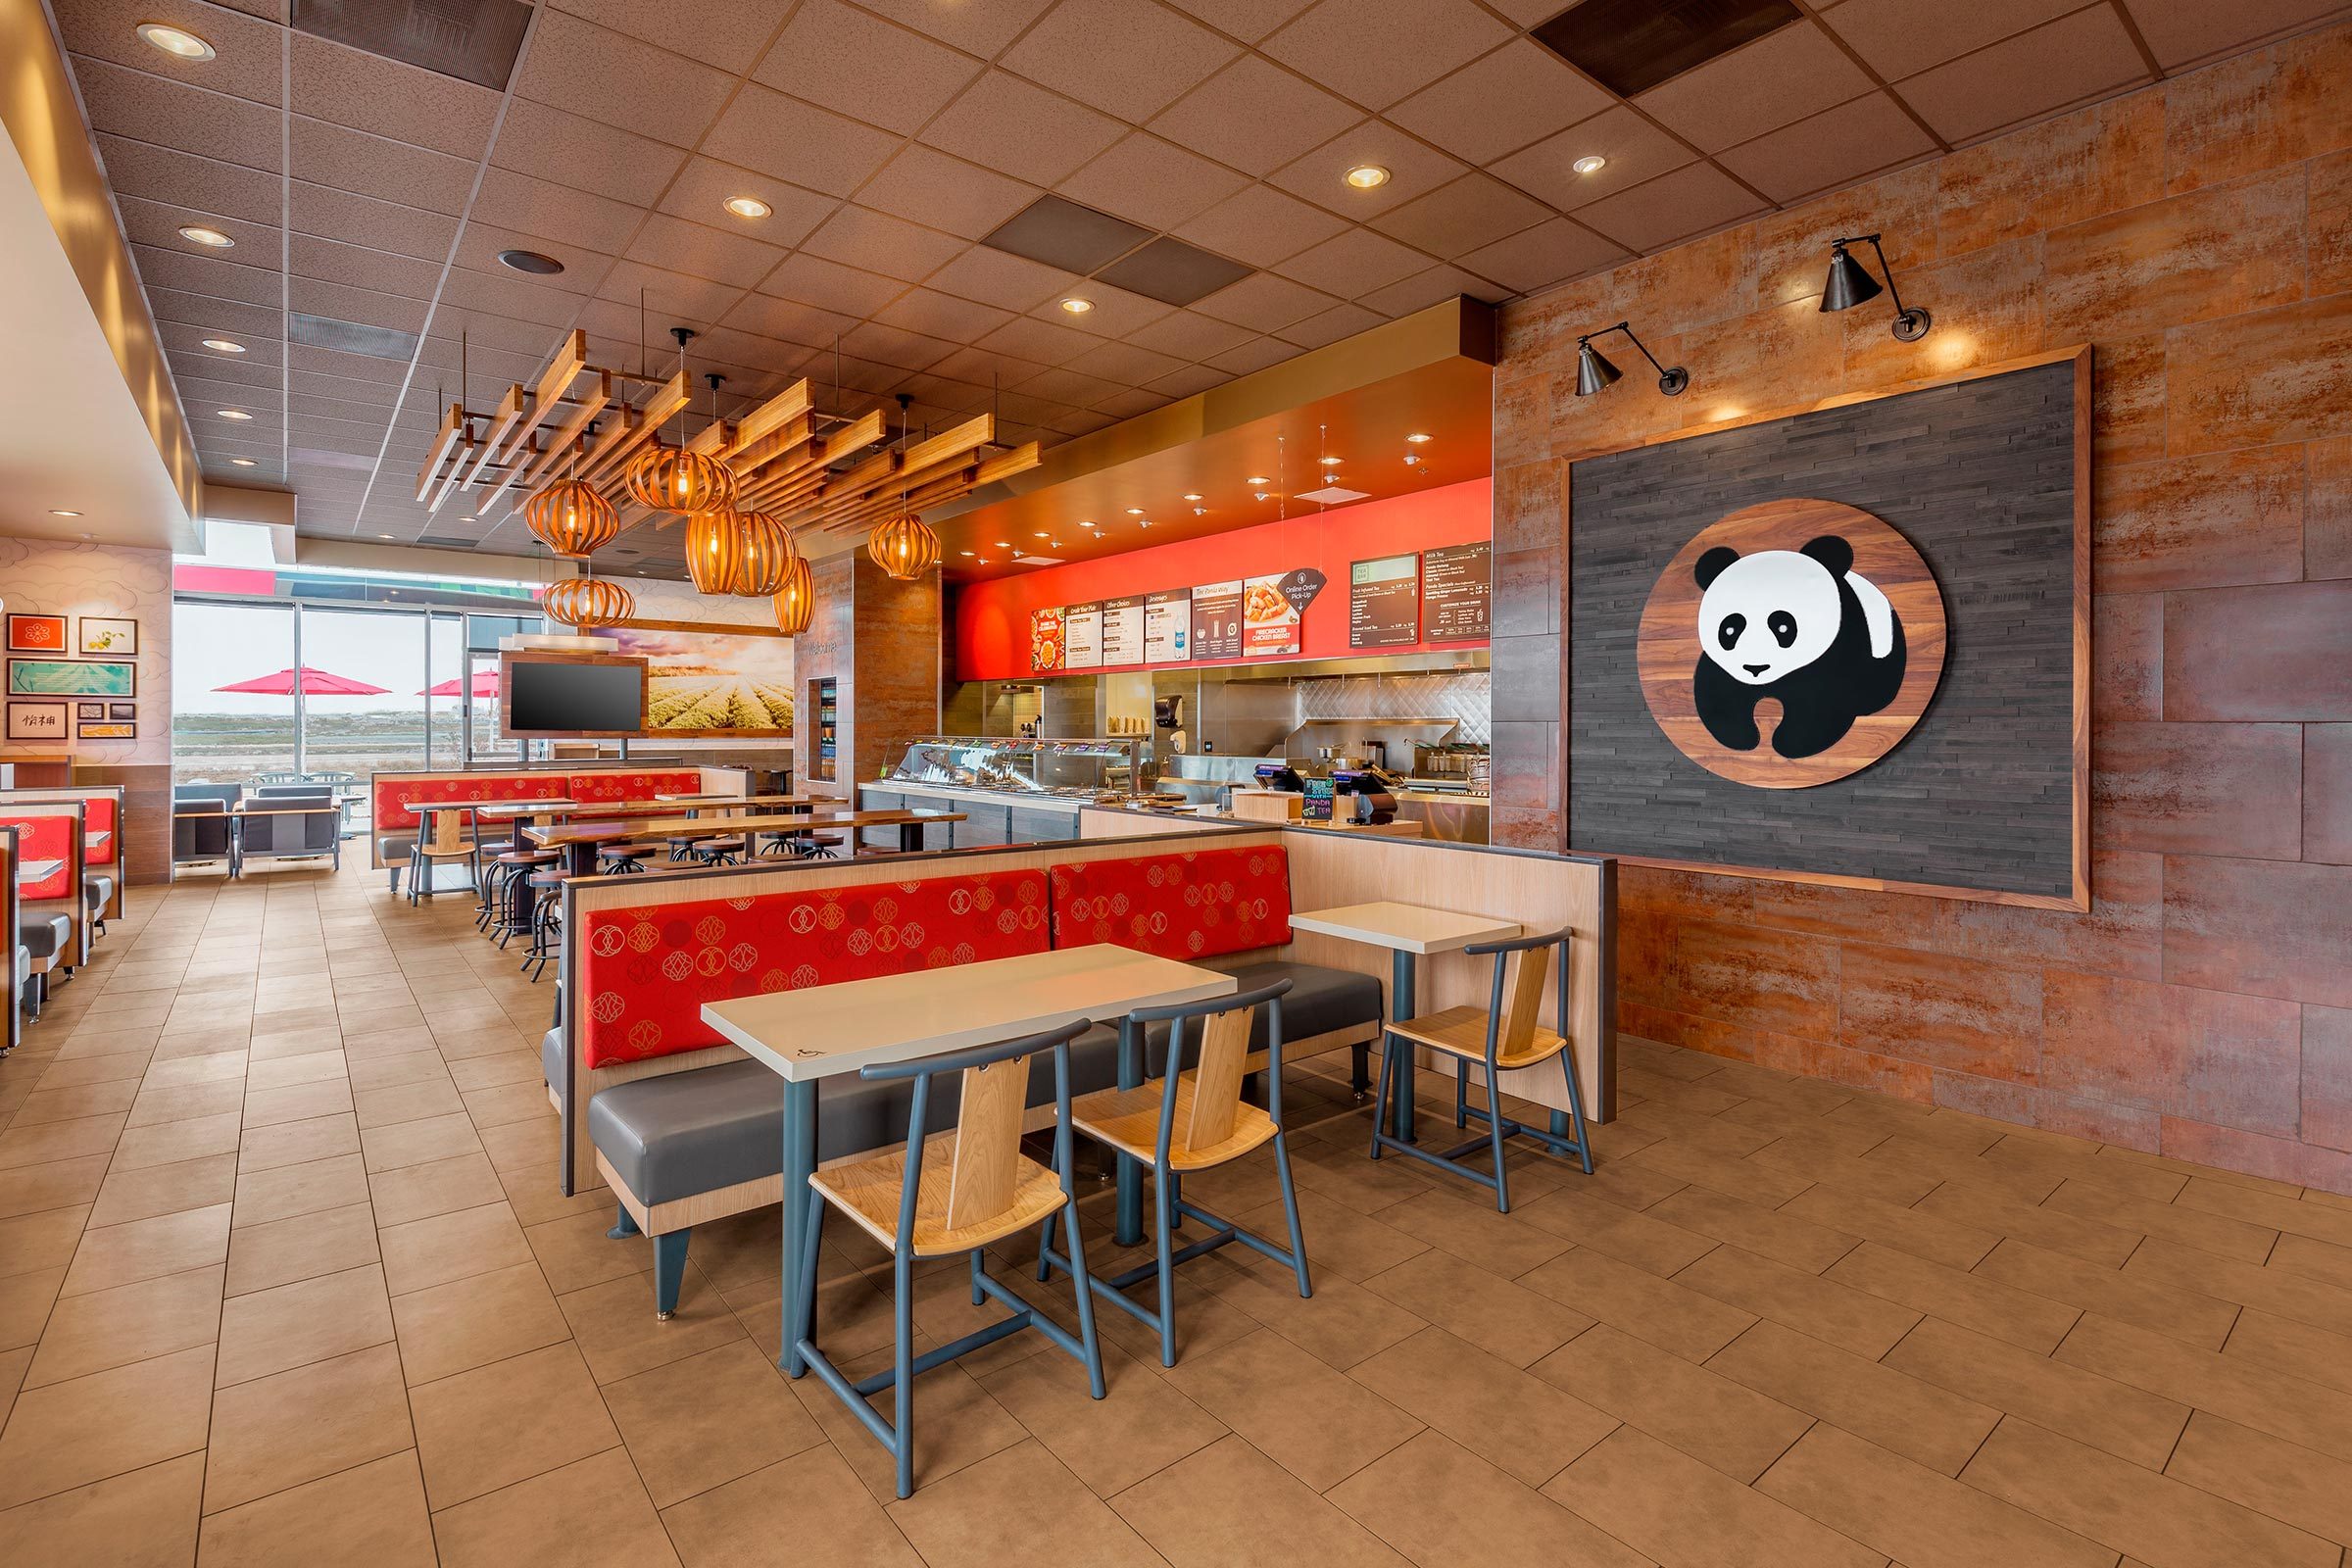 Panda Express Facts You Probably Didn't Know | Reader's Digest